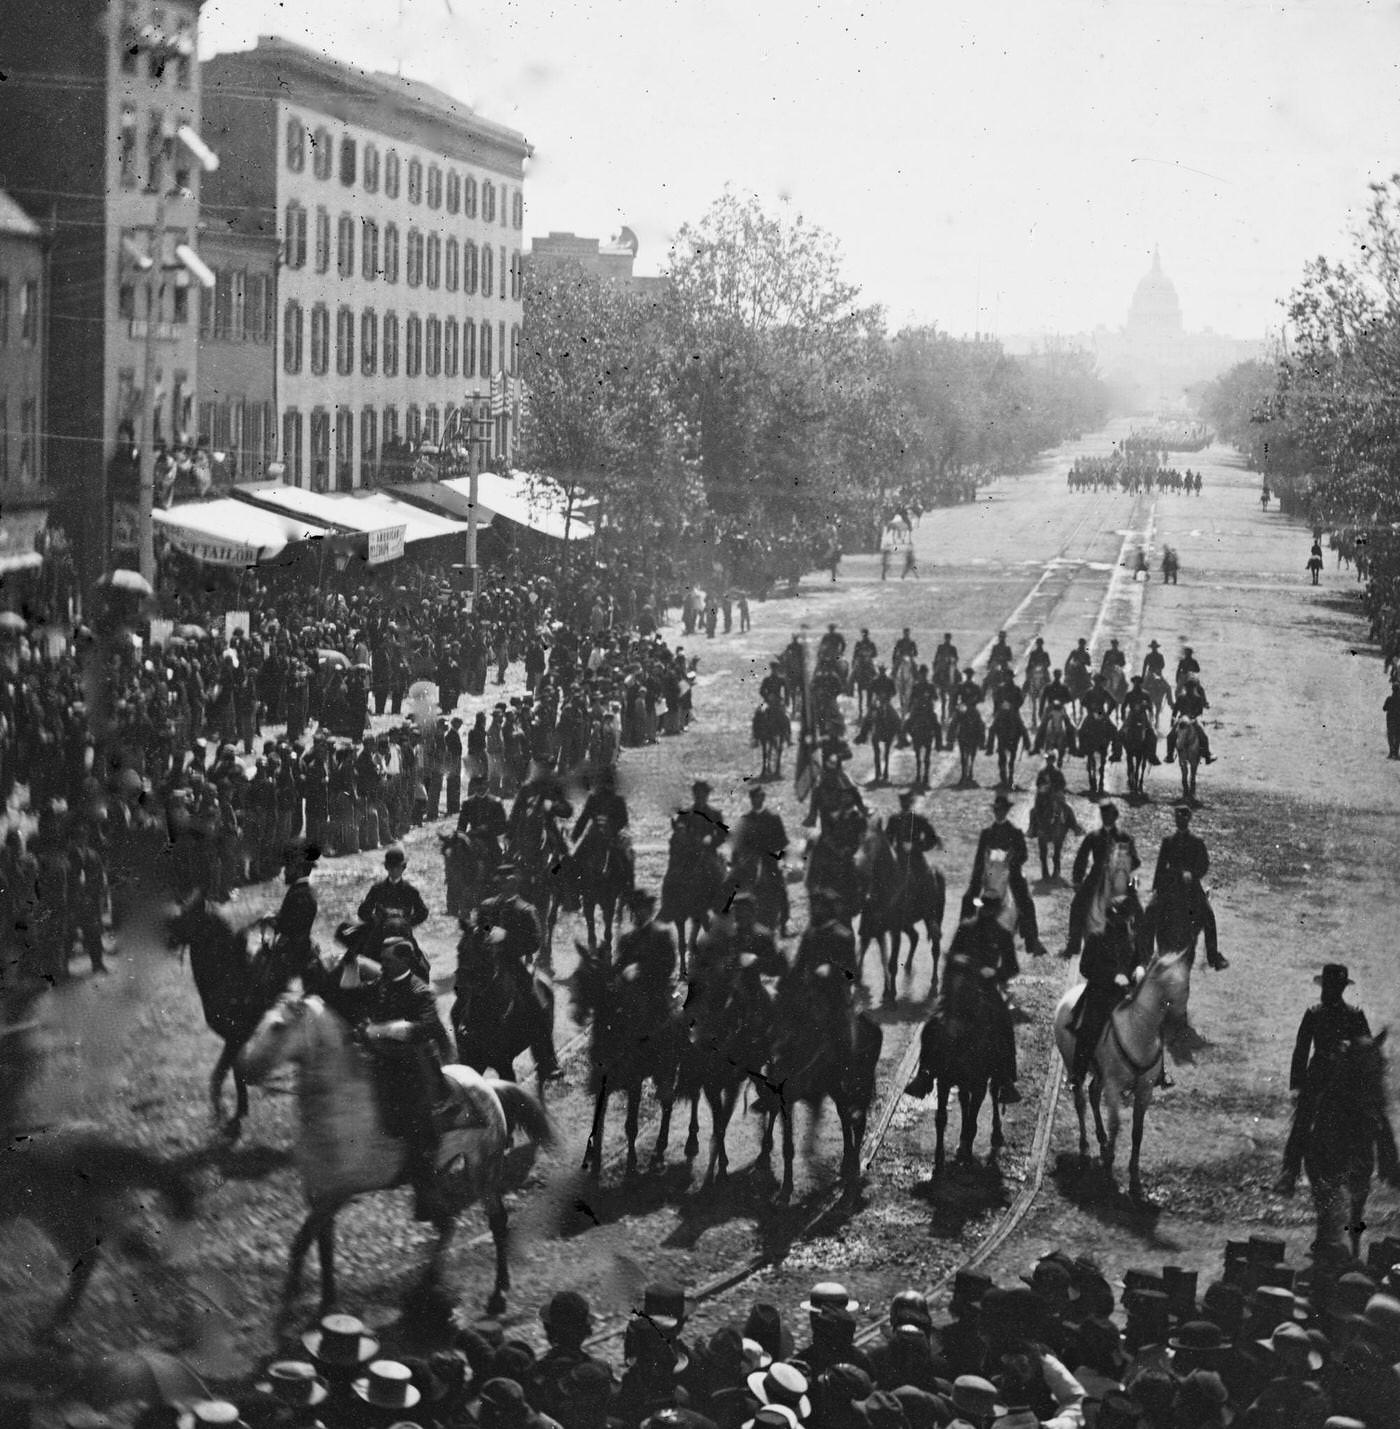 Cavalry passing on Pennsylvania Avenue near the Treasury, during the "grand review" of the Union Army, Washington, D.C., 1865